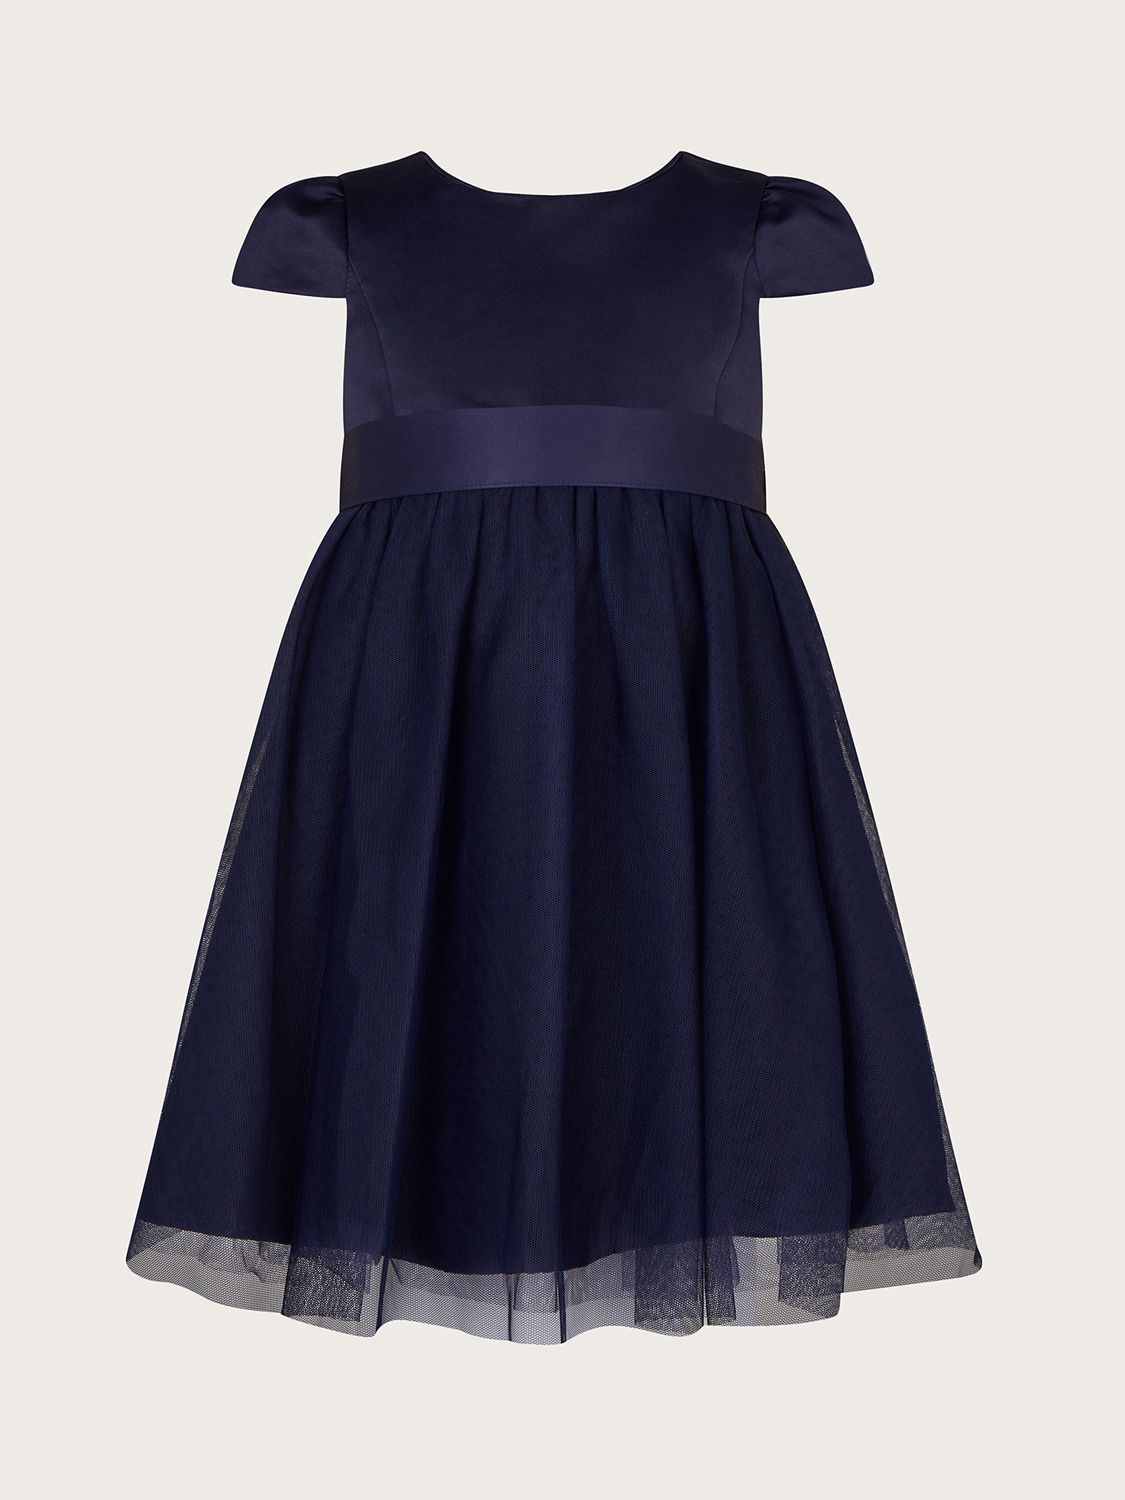 Monsoon Baby Tulle Bridesmaid Dress, Navy, 0-3 months